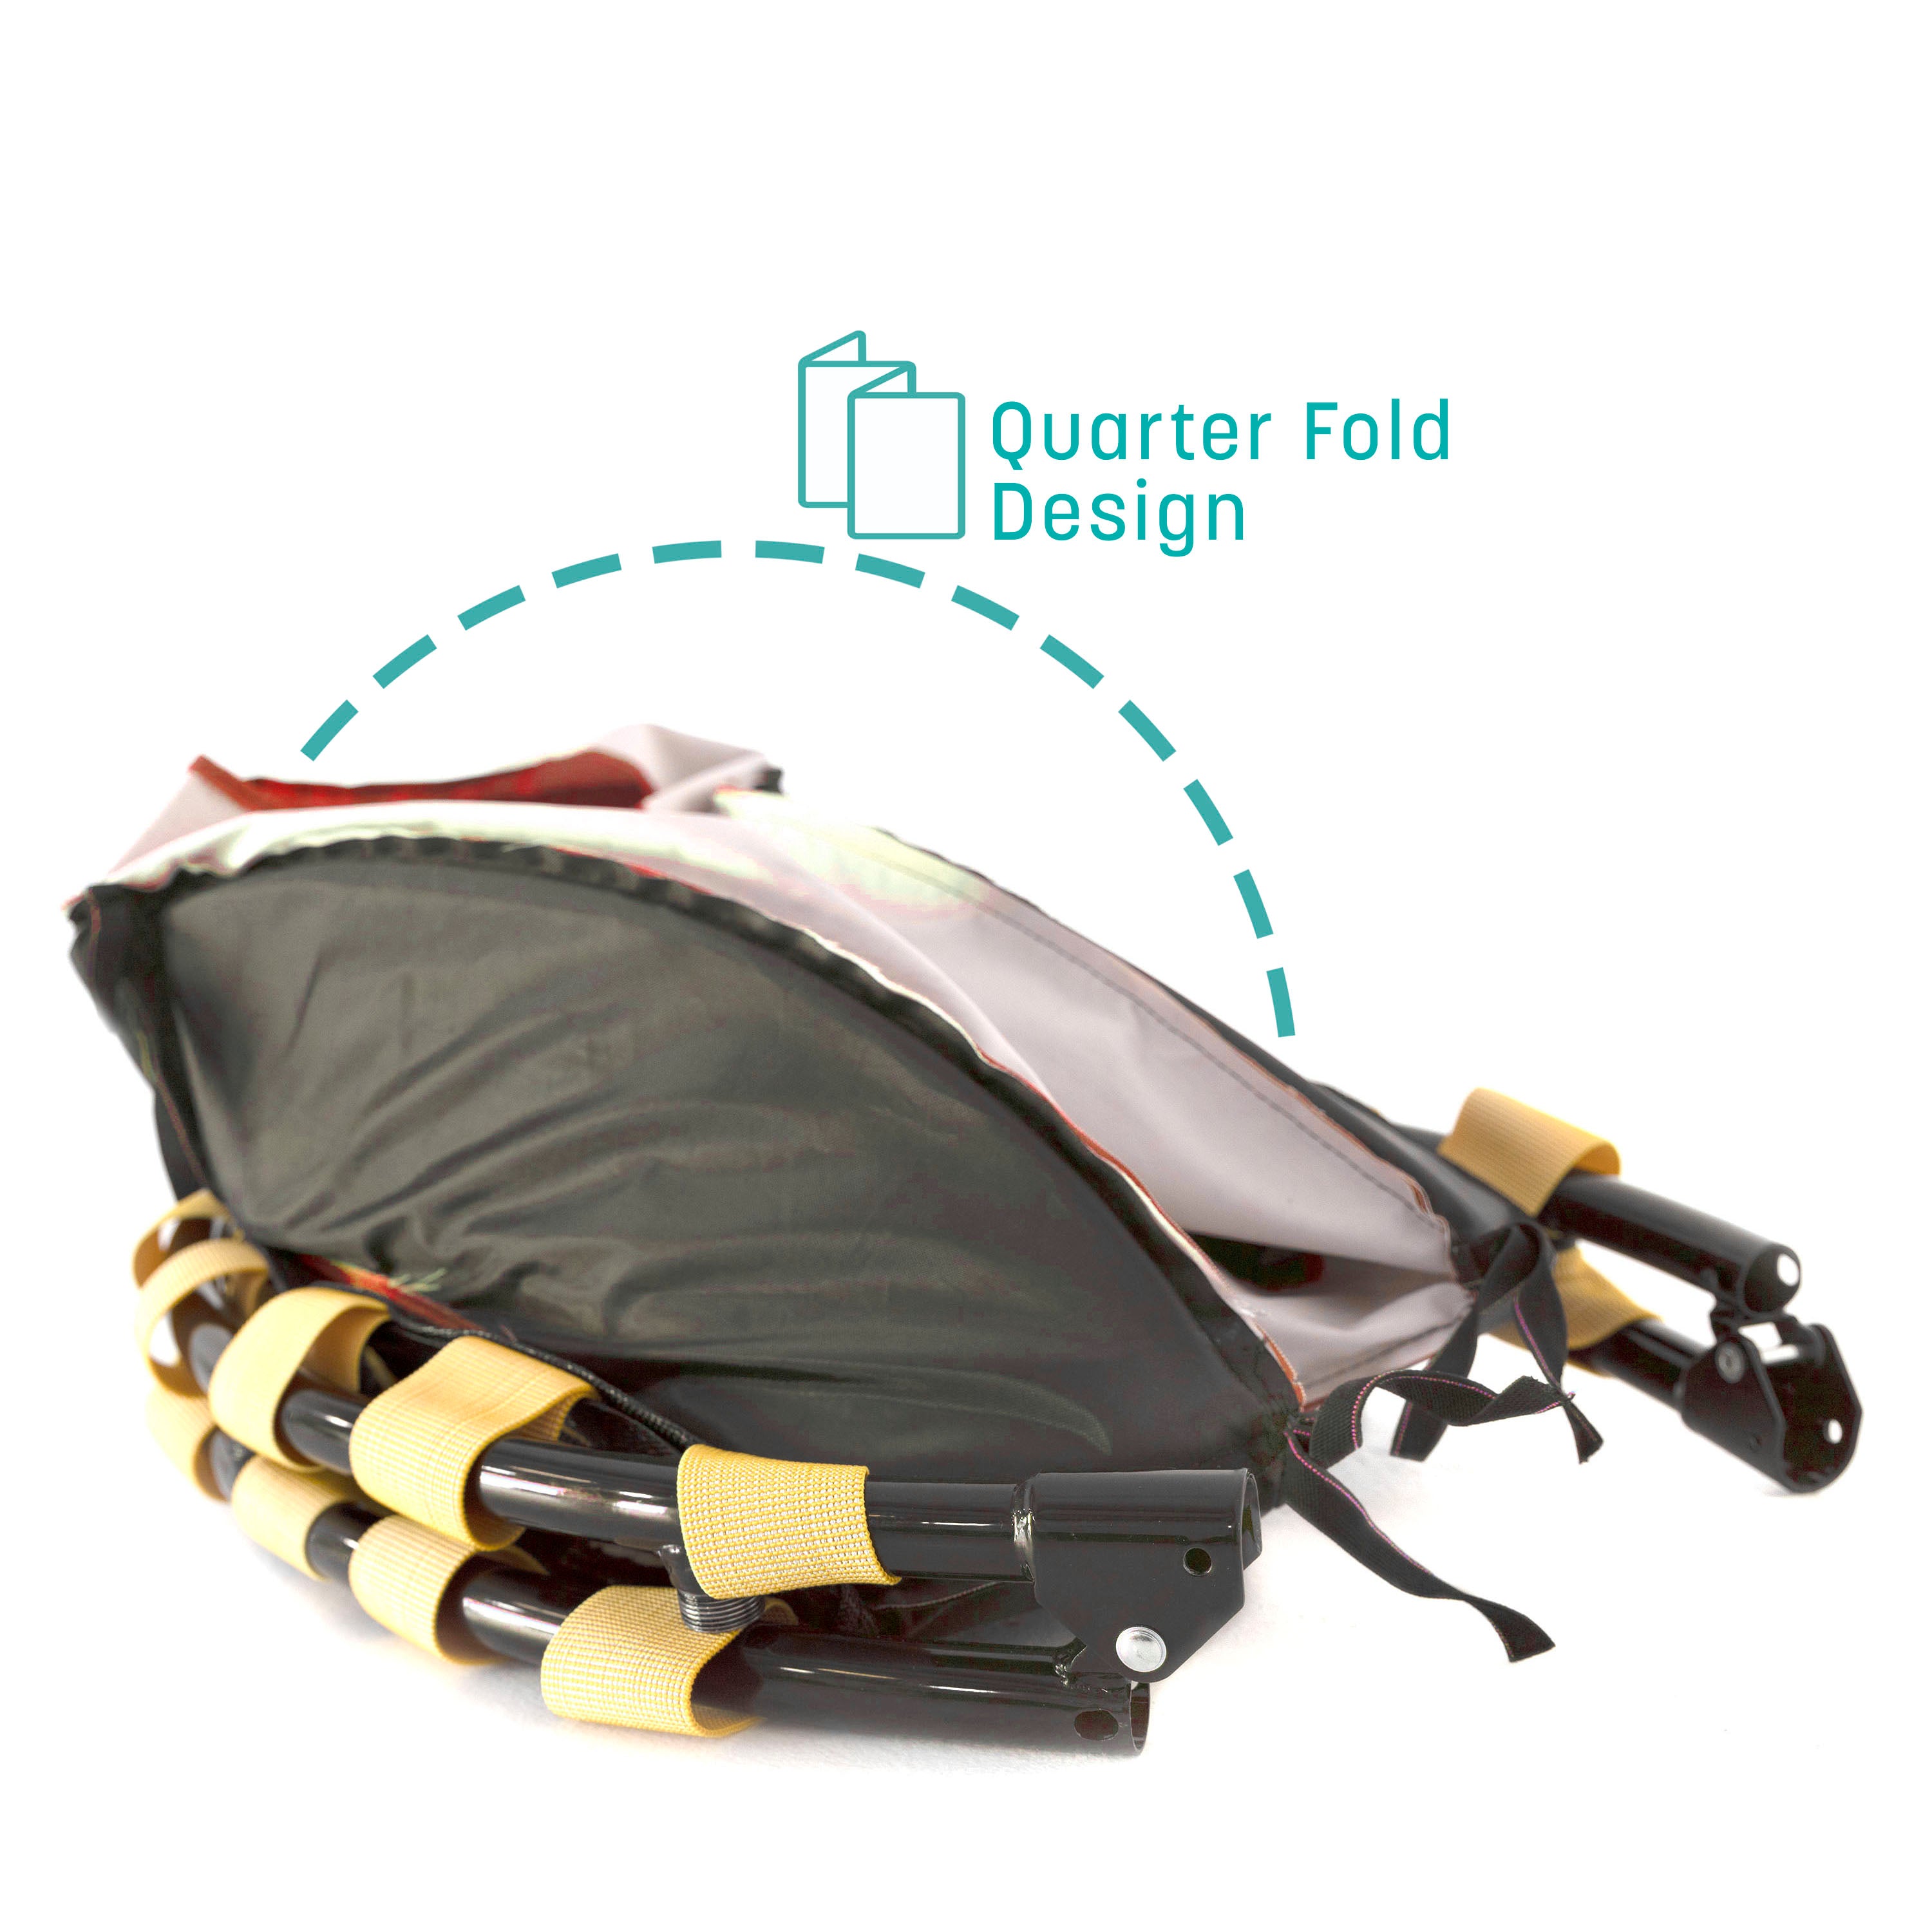 The 36” toddler trampoline is folded into quarters. A teal callout feature states, “Quarter Fold Design”. 